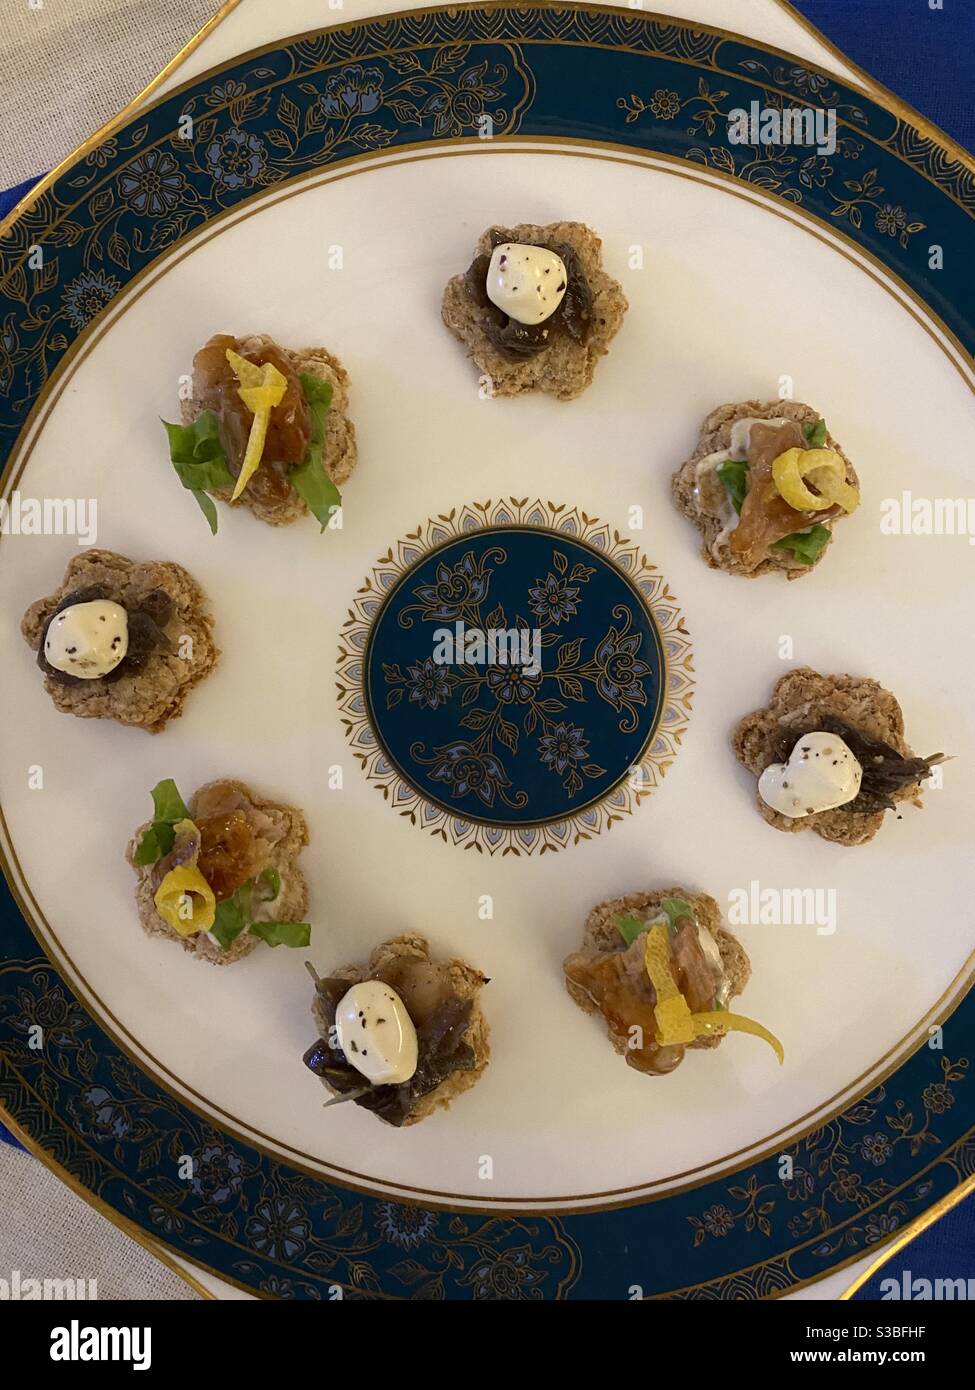 Two varieties of canapés presented on a Royal Doulton plate. Caramelised onion topped with sour cream and black pepper;smoked eel with lettuce shreds and lemon zest knot, both in homemade oatcakes. Stock Photo